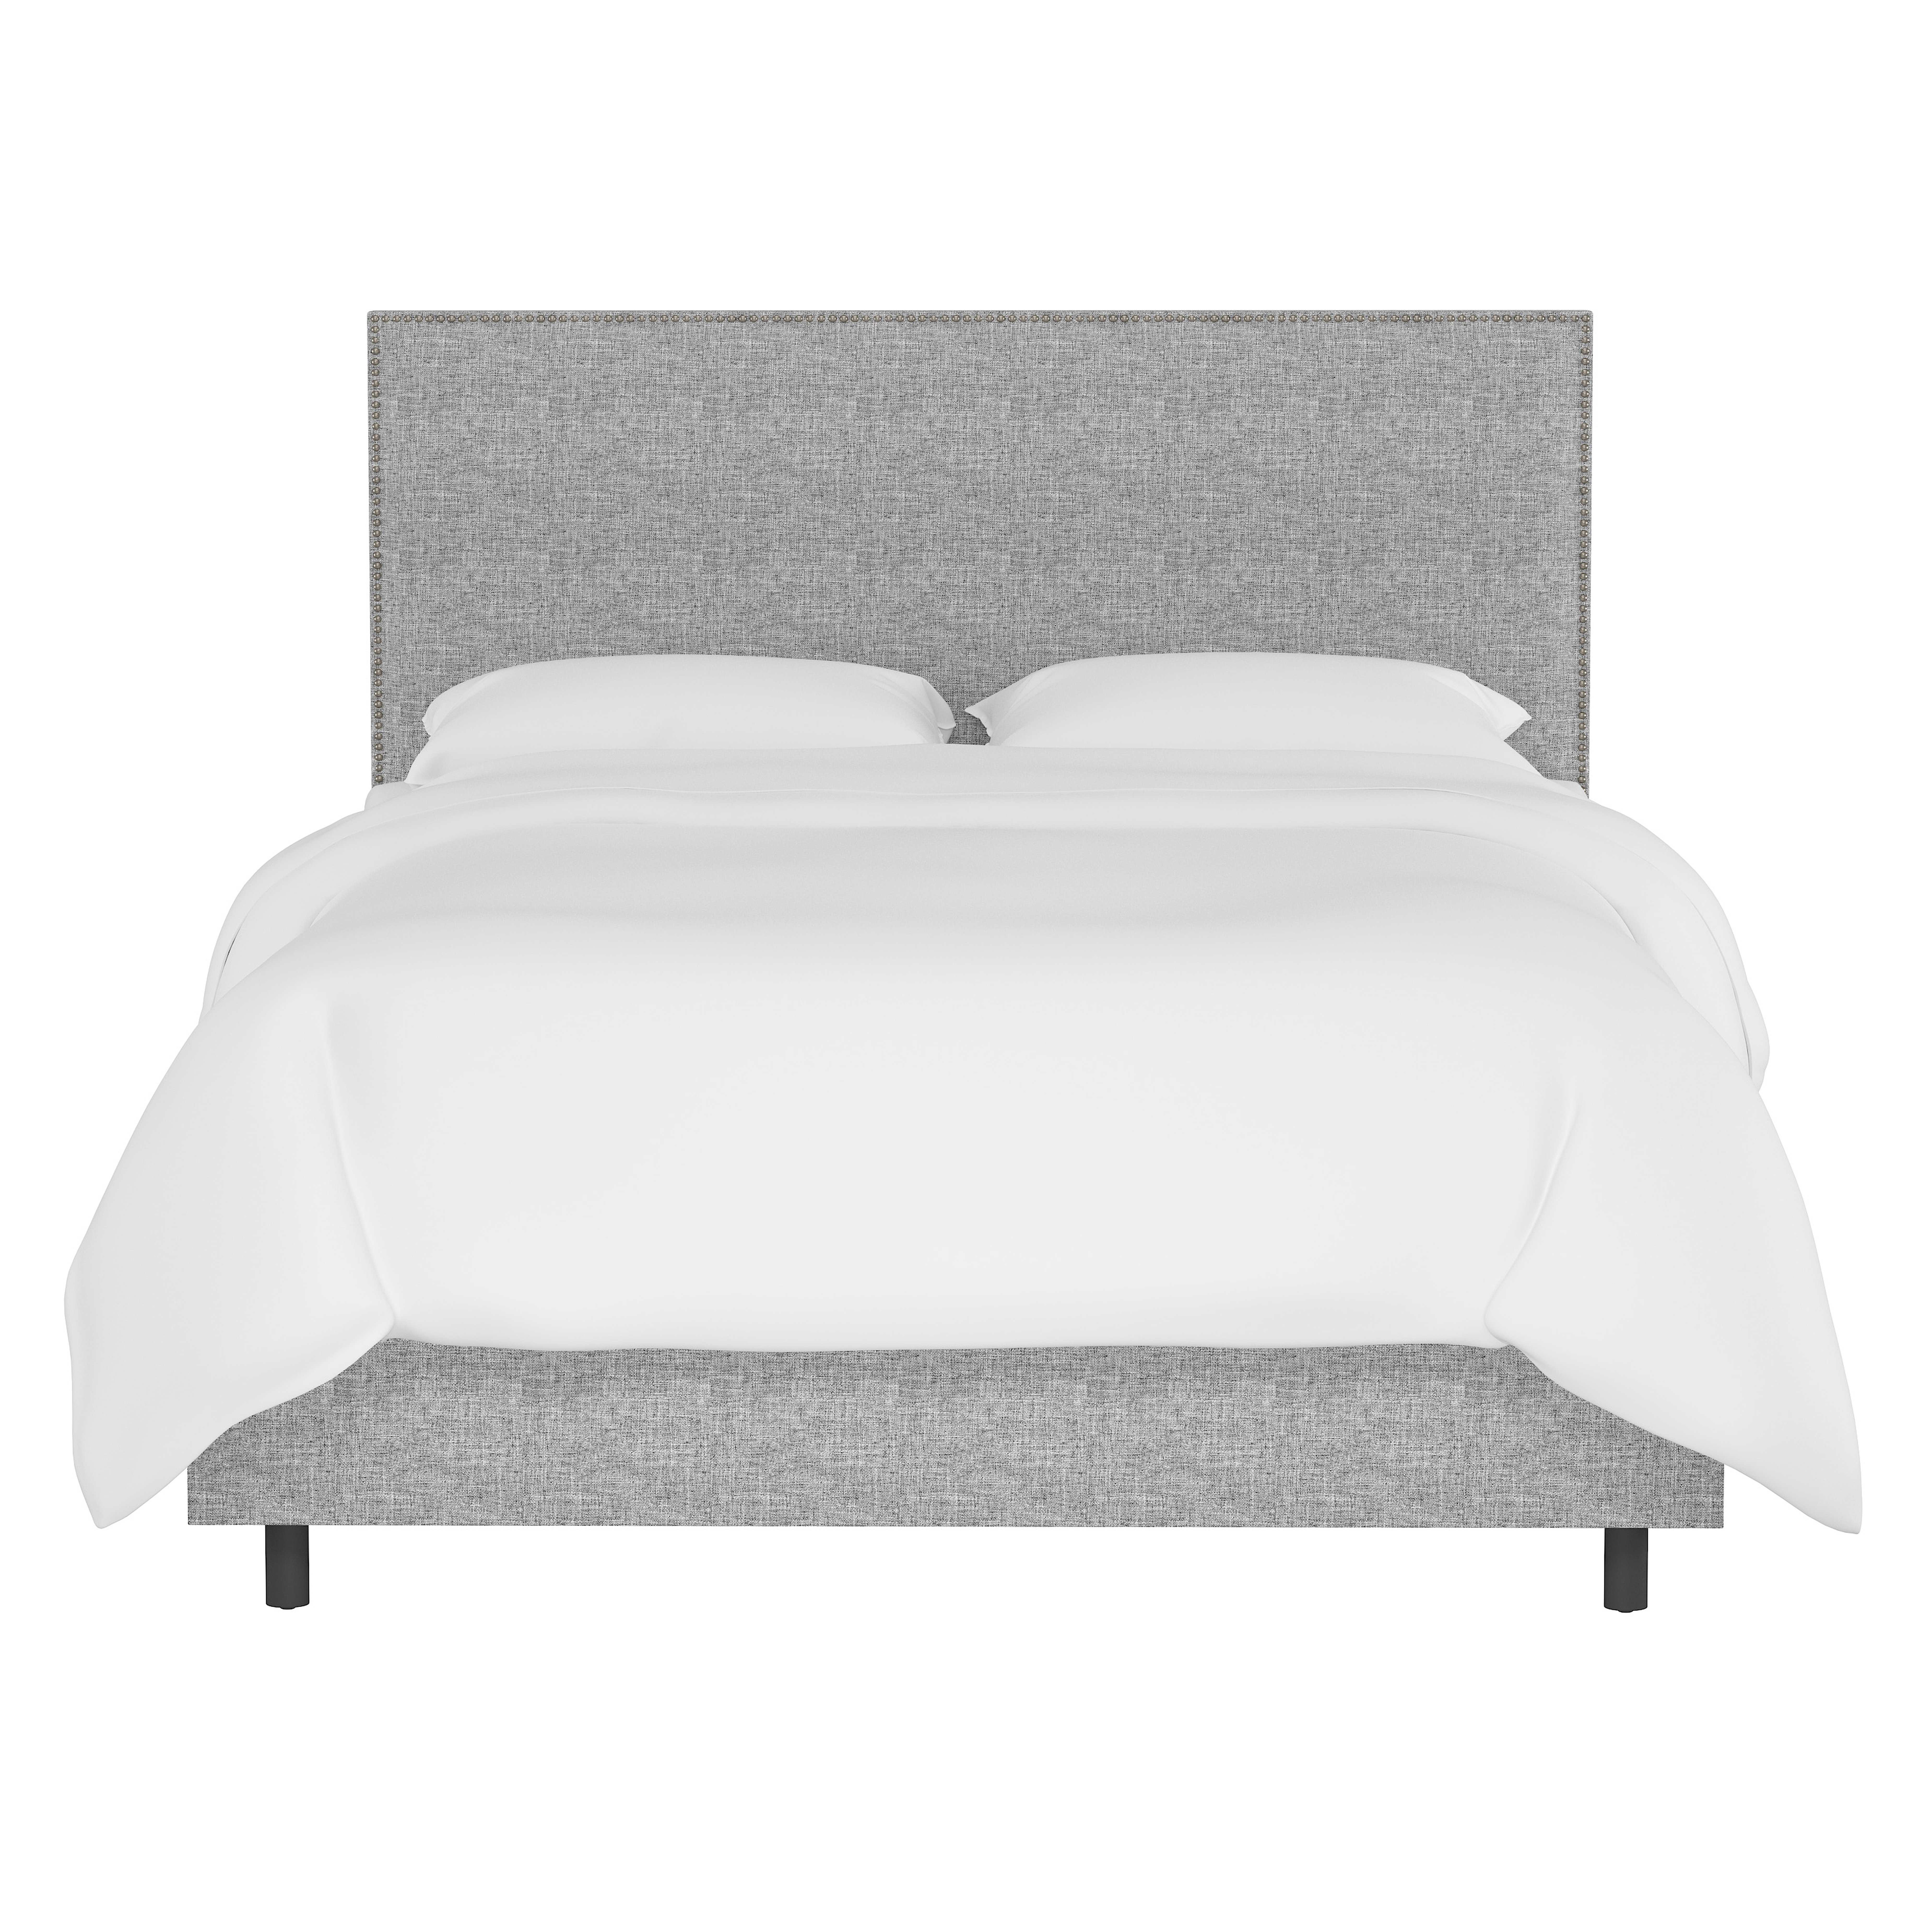 Ellsworth Bed, California King, Pumice, Pewter Nailheads - Cove Goods